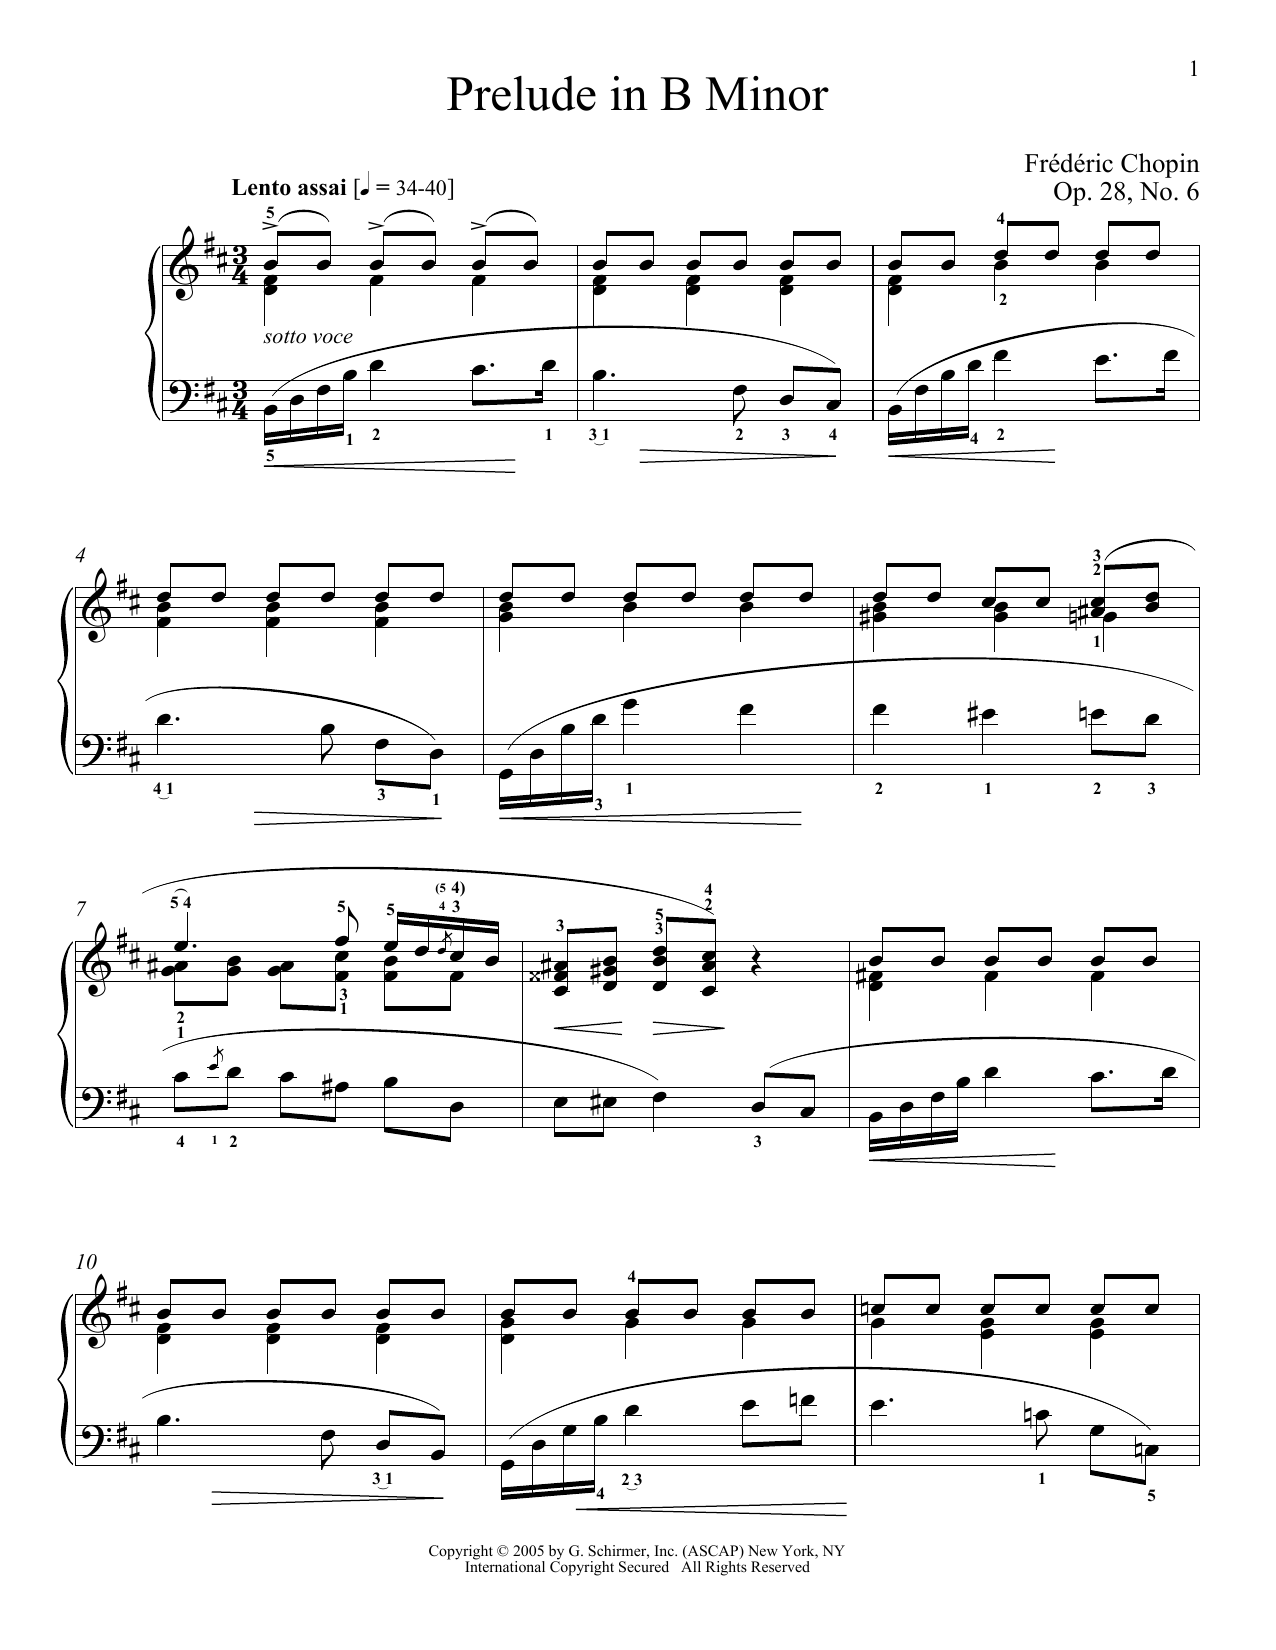 Download Frederic Chopin Prelude In B Minor, Op. 28, No. 6 Sheet Music